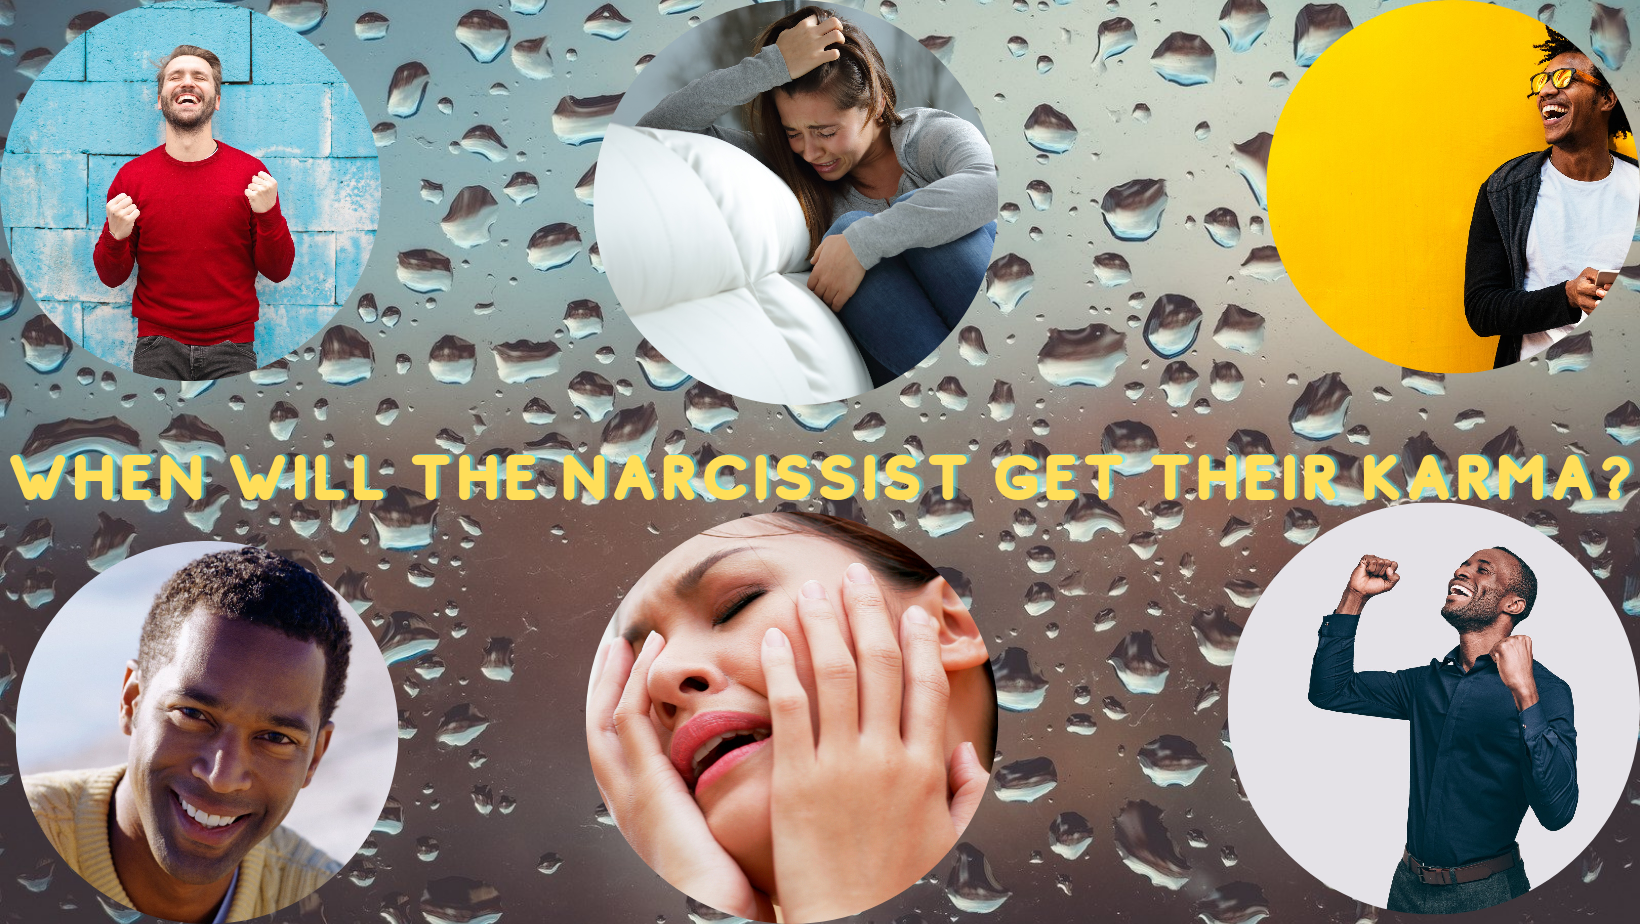 When Will The Narcissist Get Their Karma? They Look So Happy Without Me! Read This…